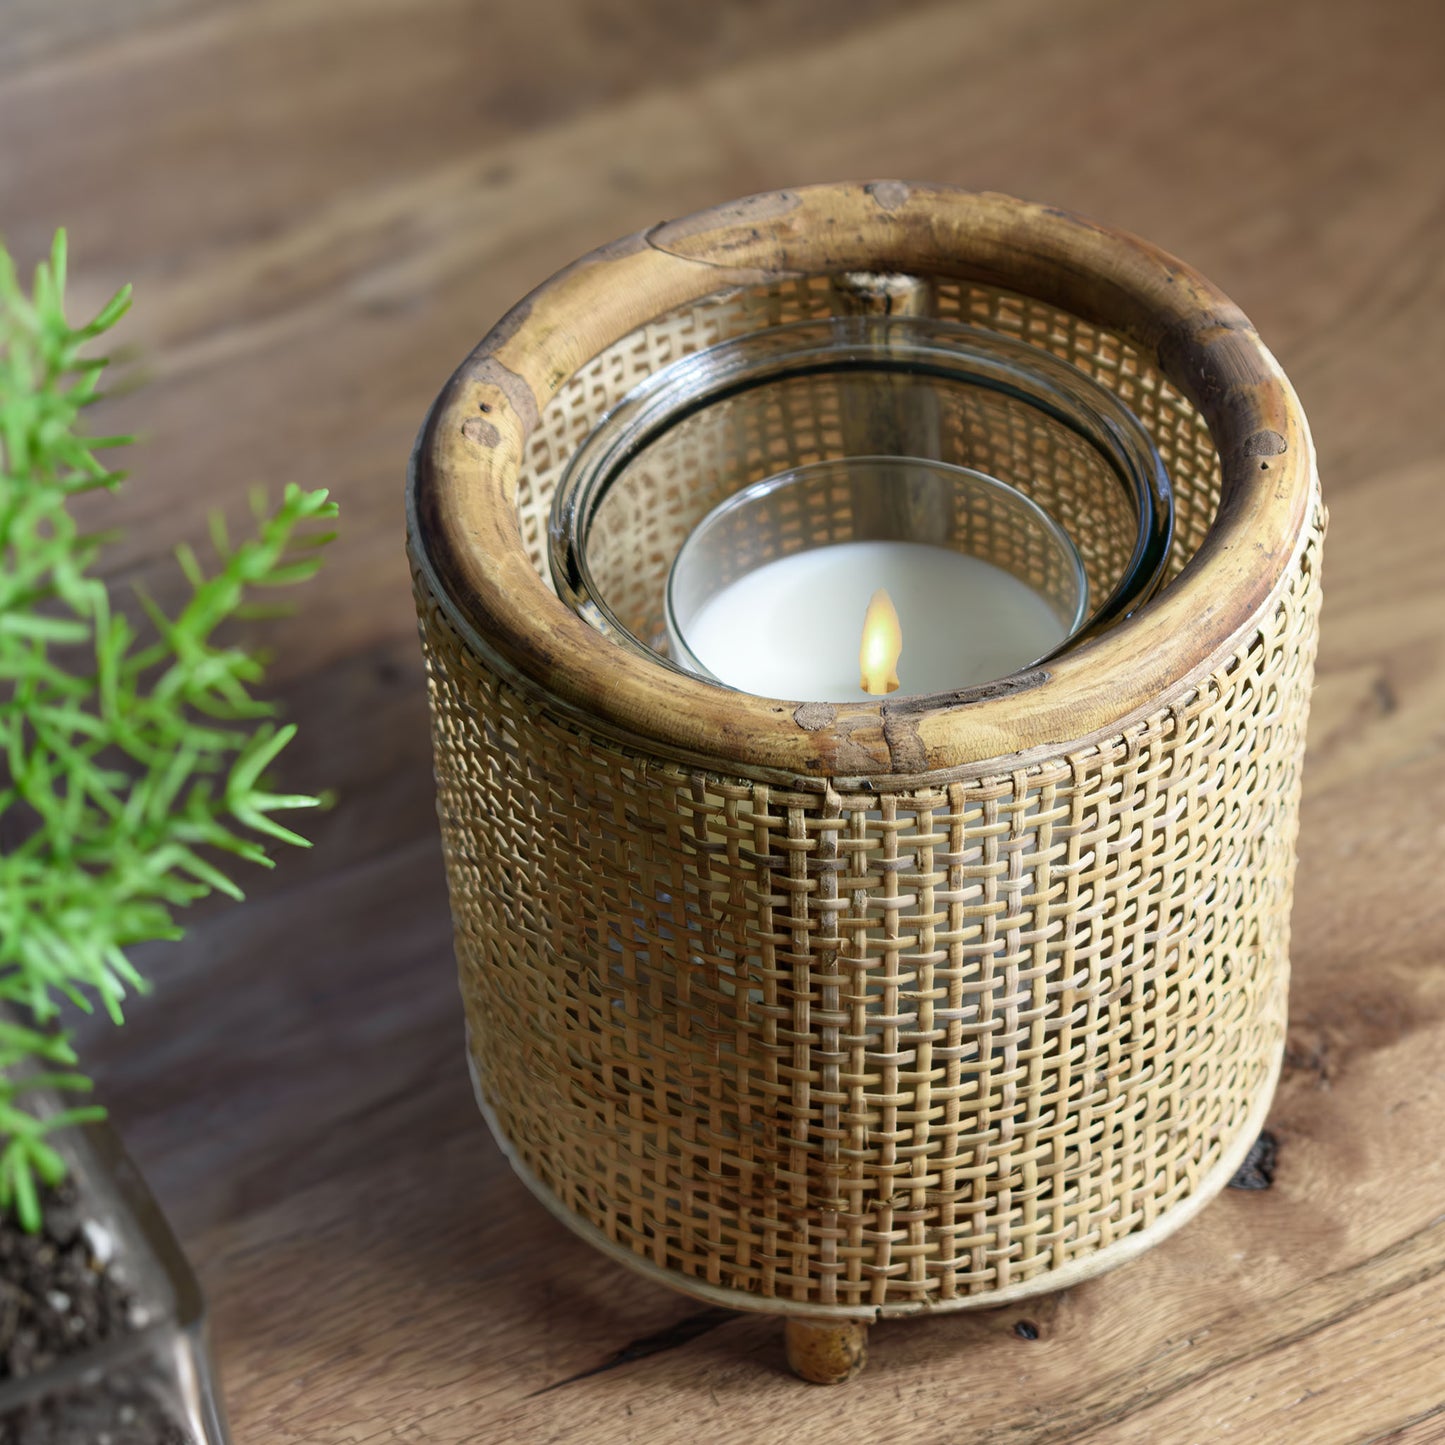 Rattan round hurricane candleholder on wooden table with rosemary.